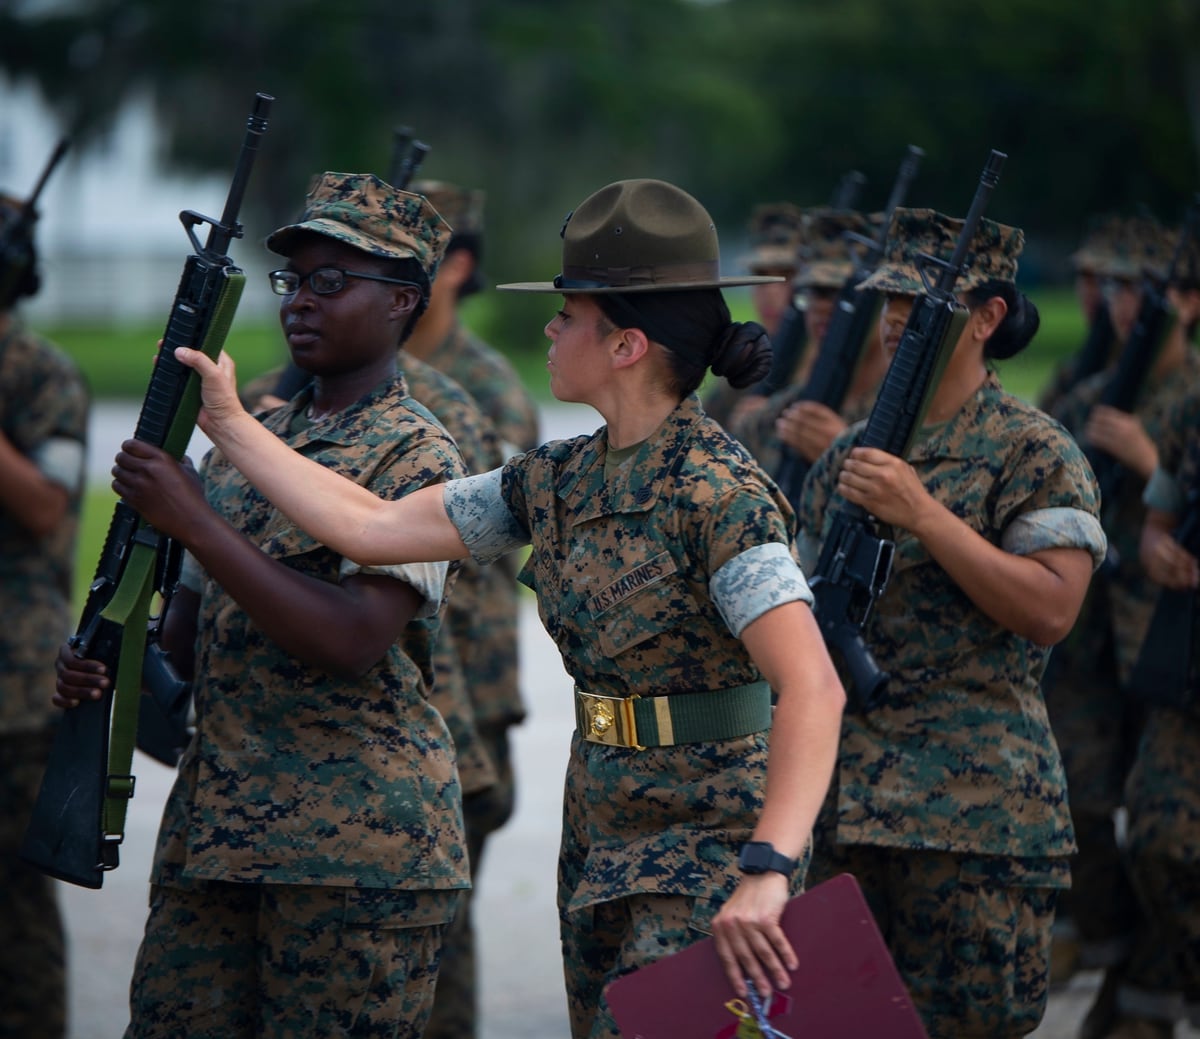 The Marine Corps wants a study on how to make recruit training coed